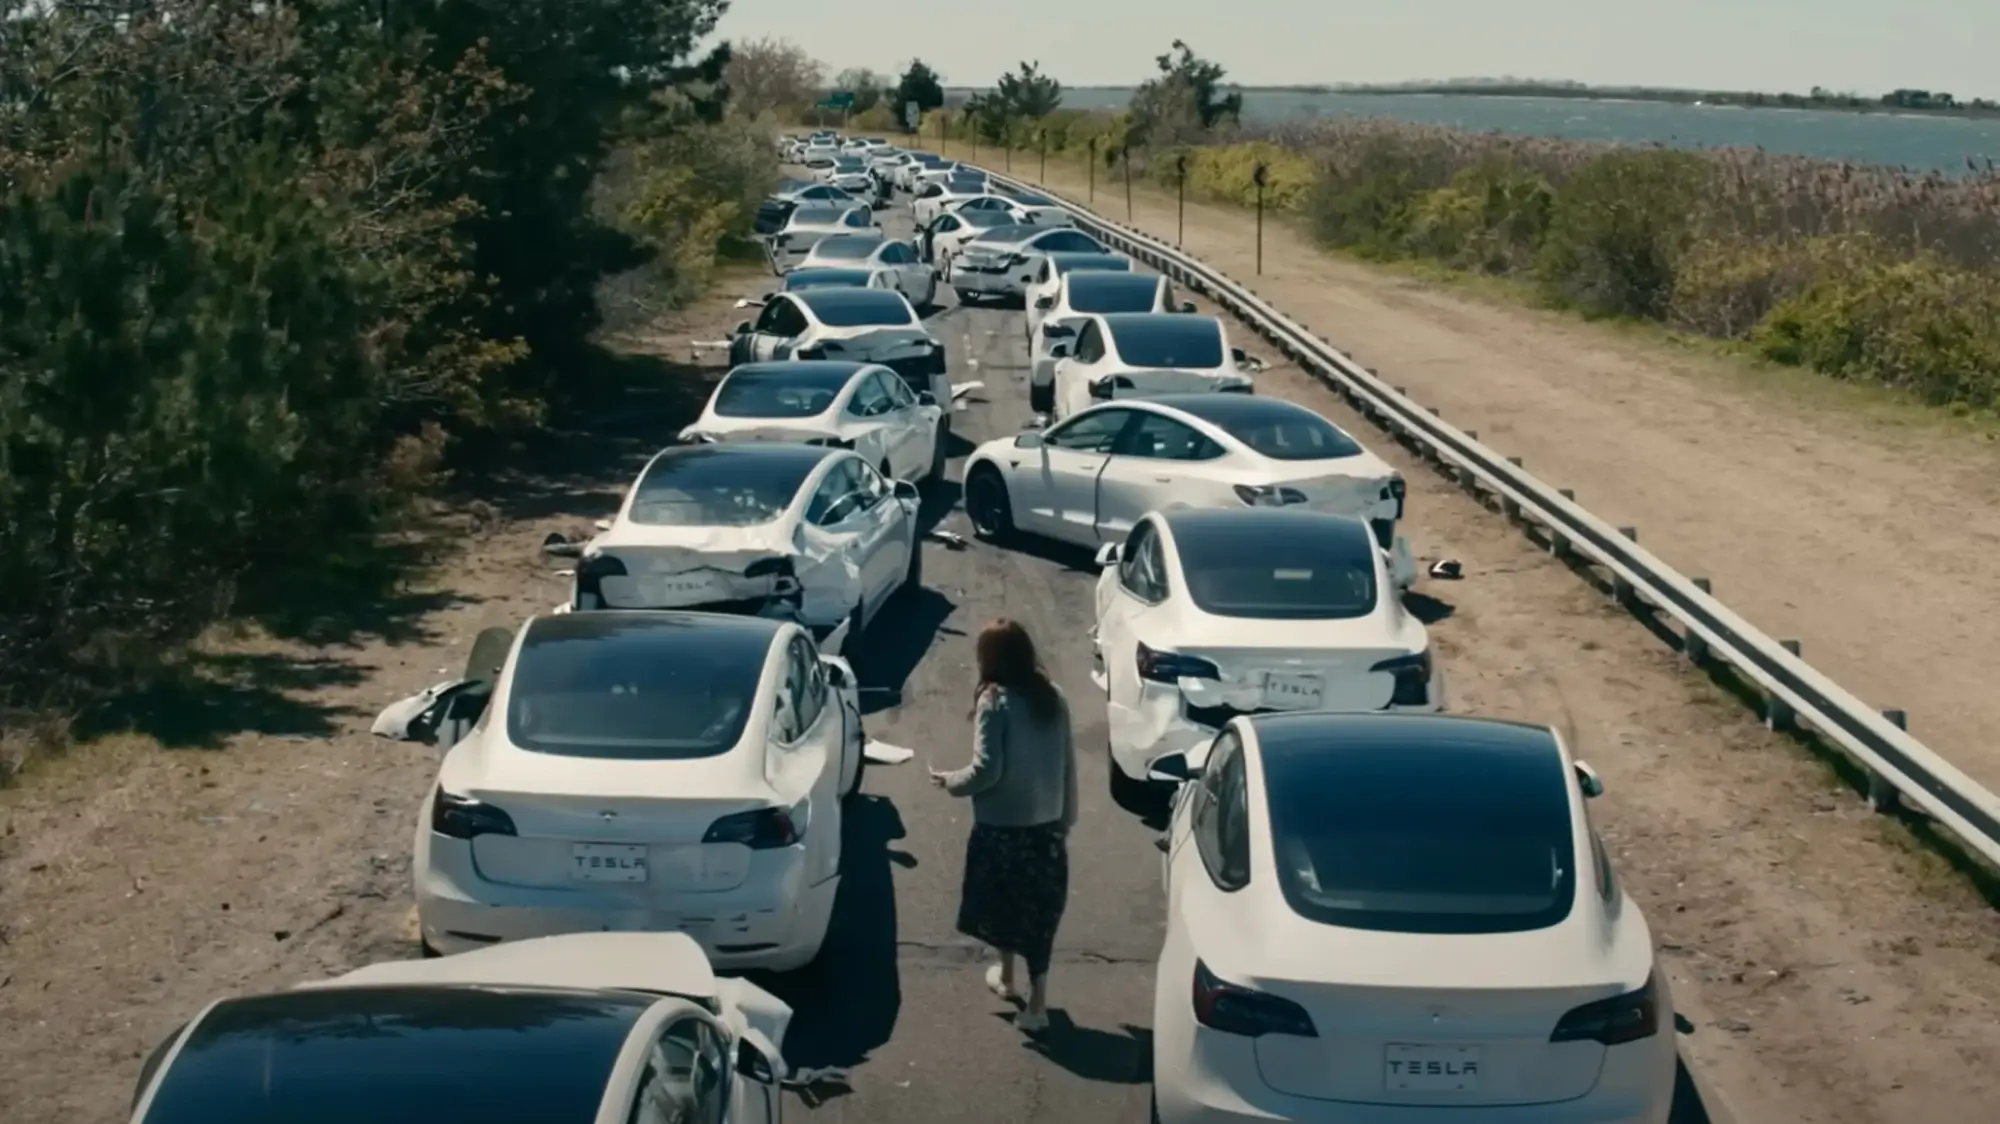 The Tesla scene in Leave the World Behind 